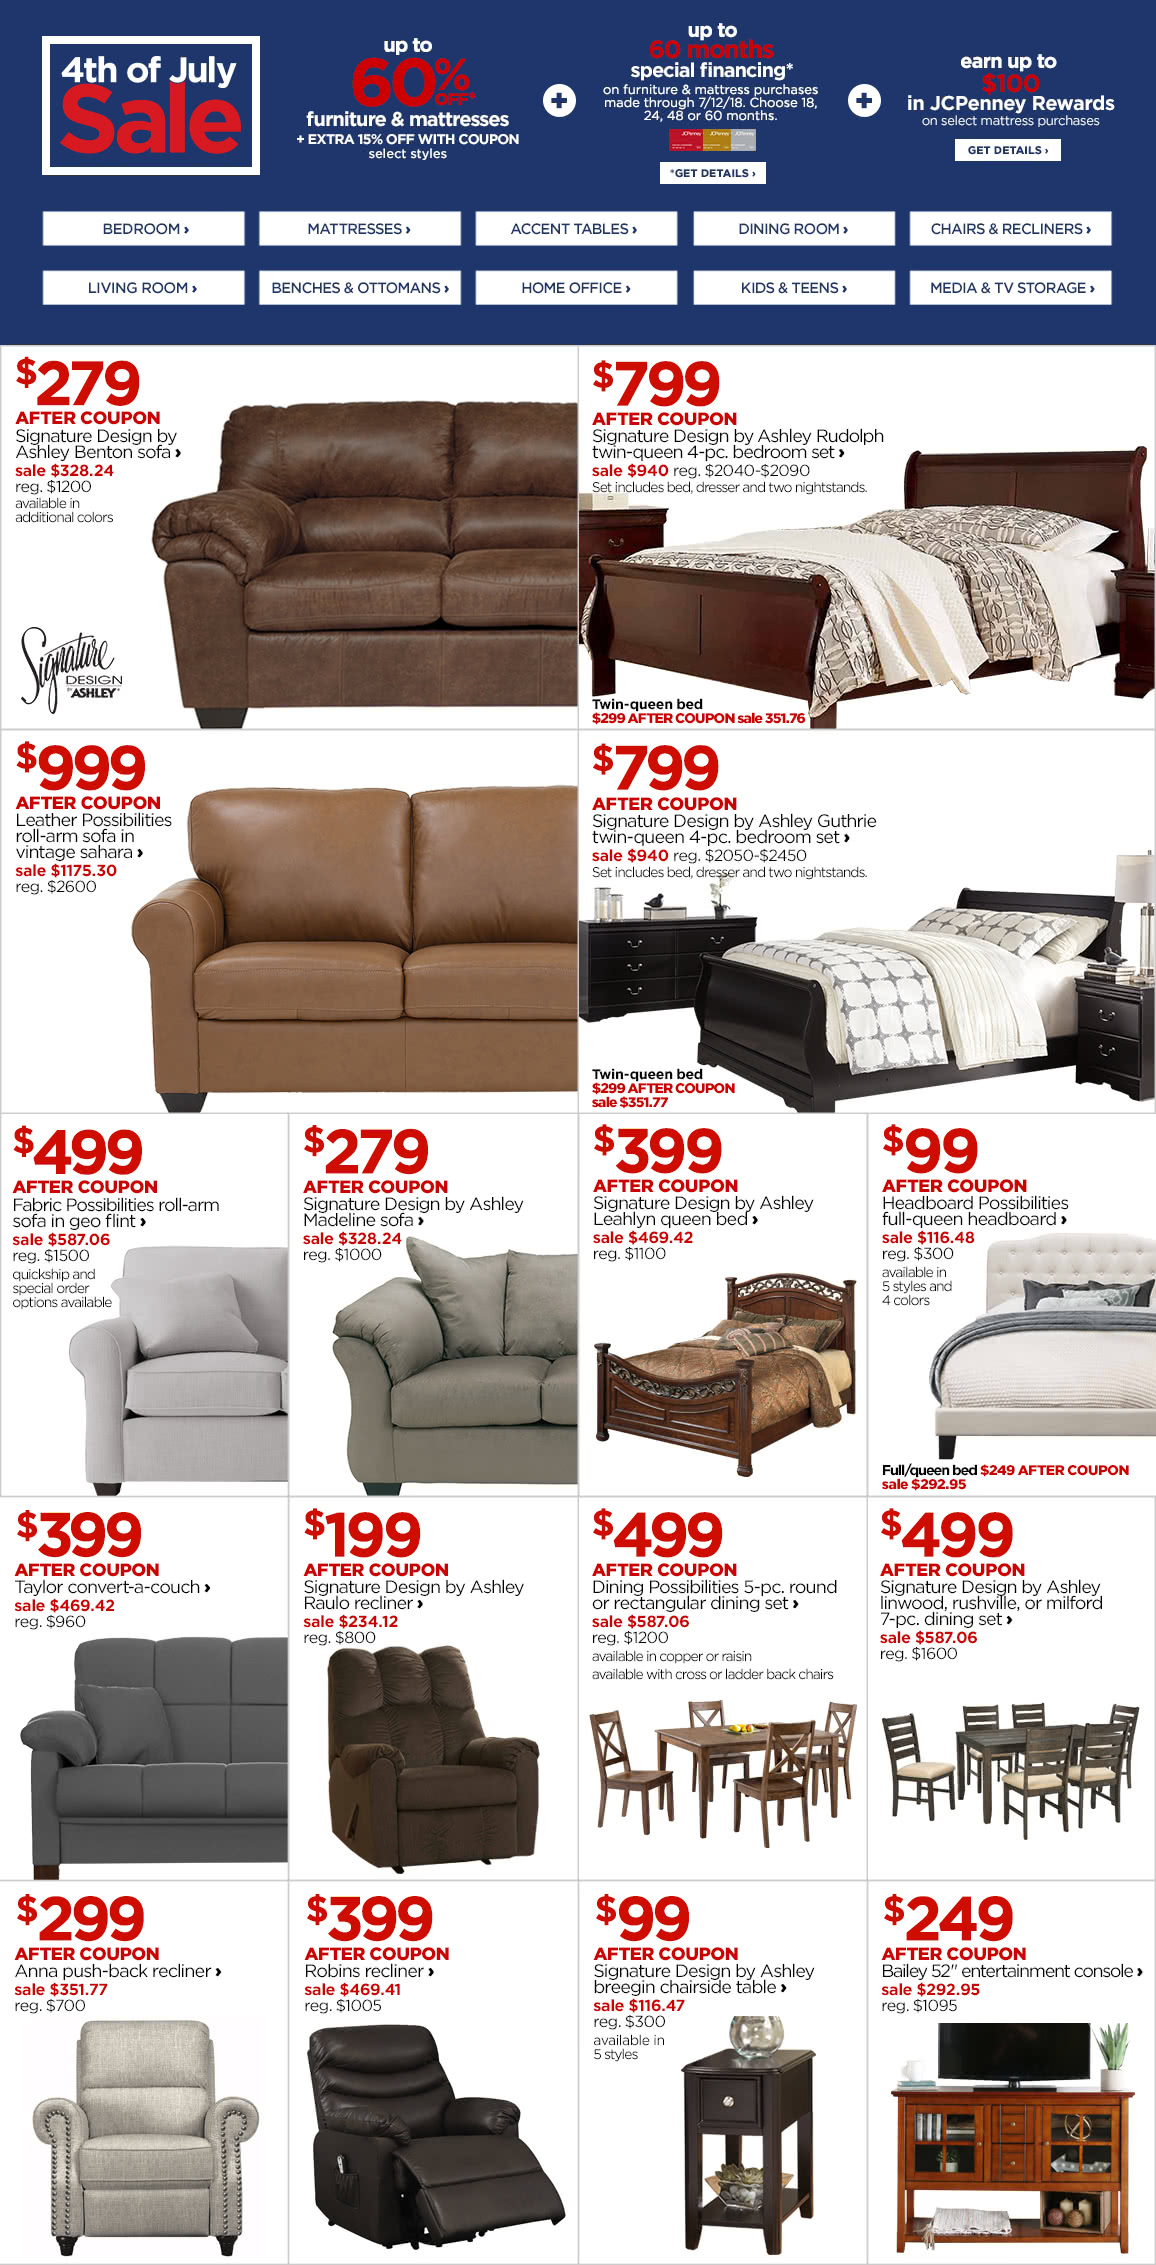 couches-on-clearance-near-me-semashow